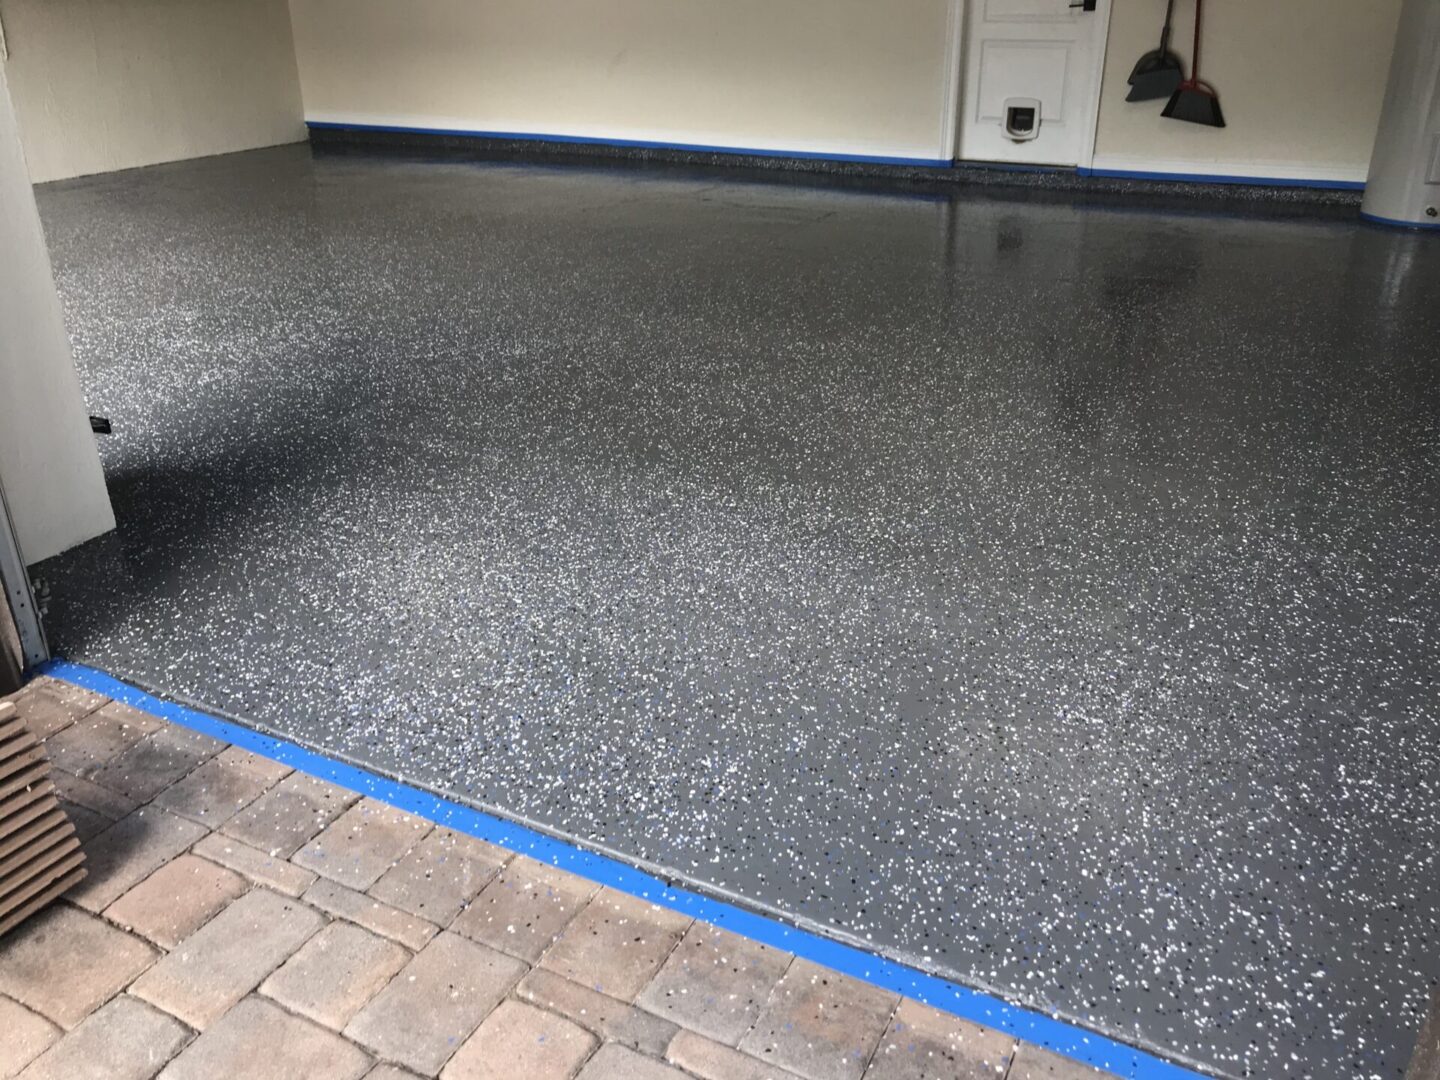 A black and blue garage floor with a dog in the corner.